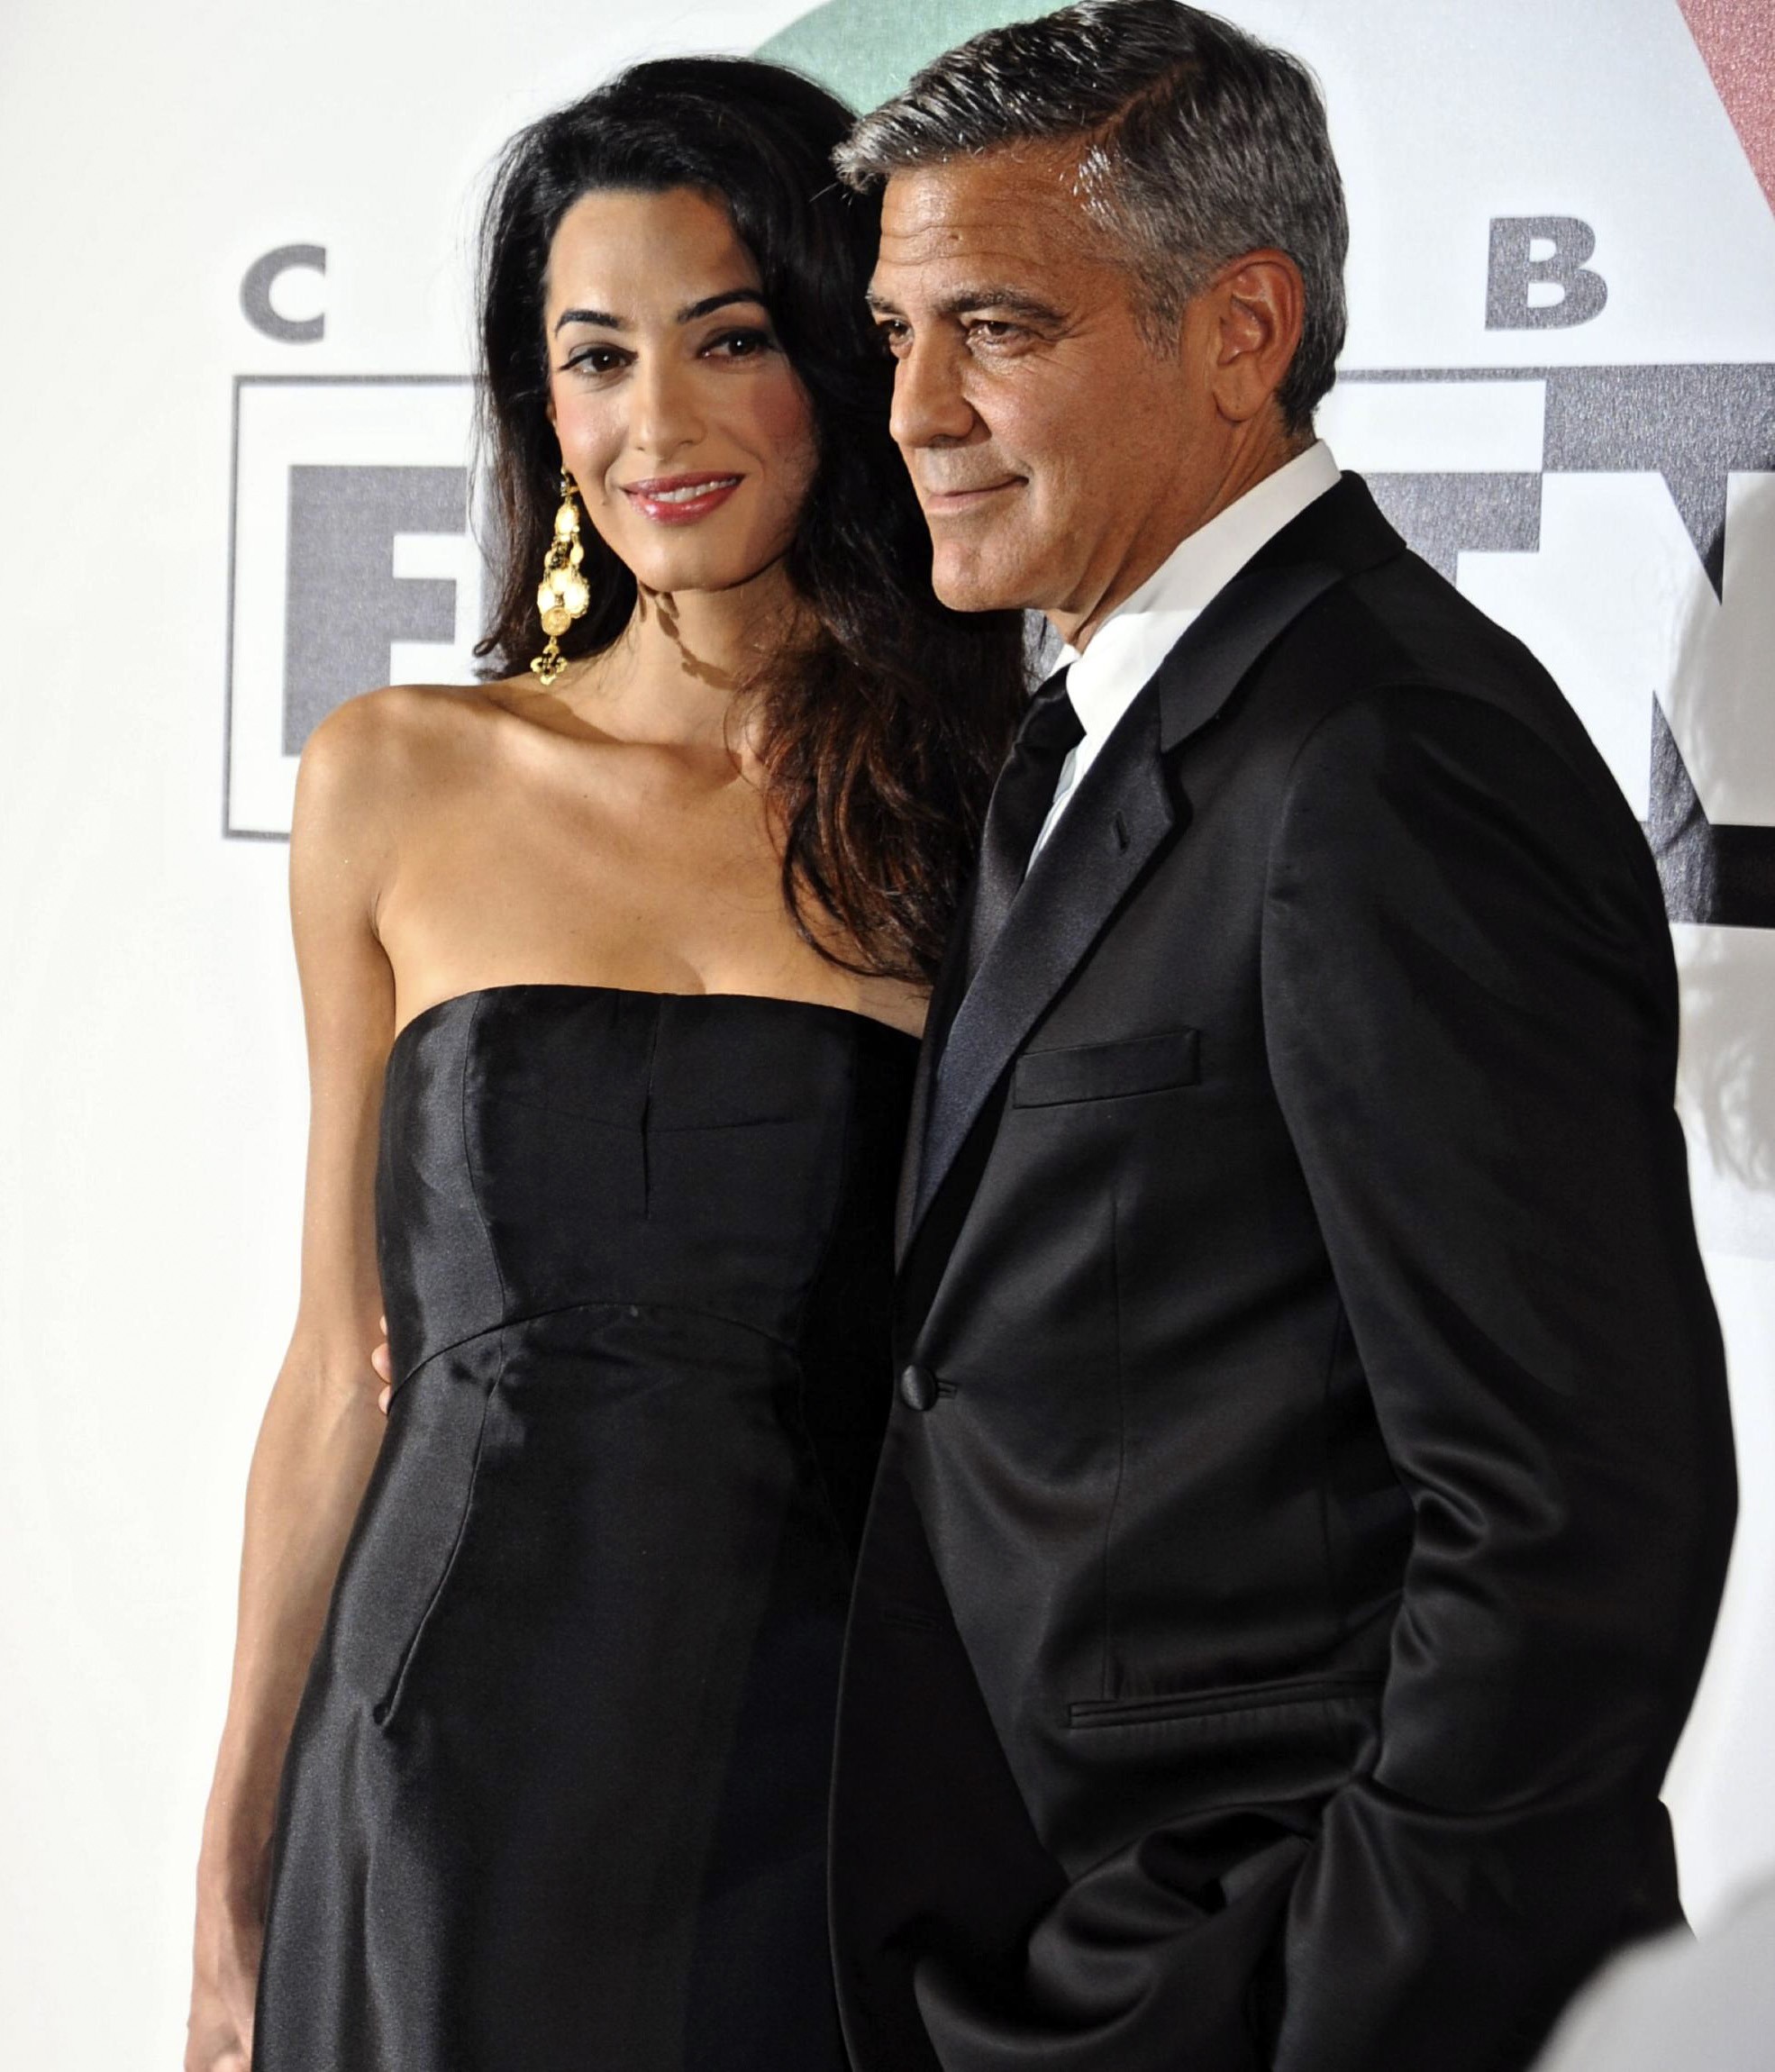 George Clooney e Amal Alamuddin (Foto: The Grosby Group)